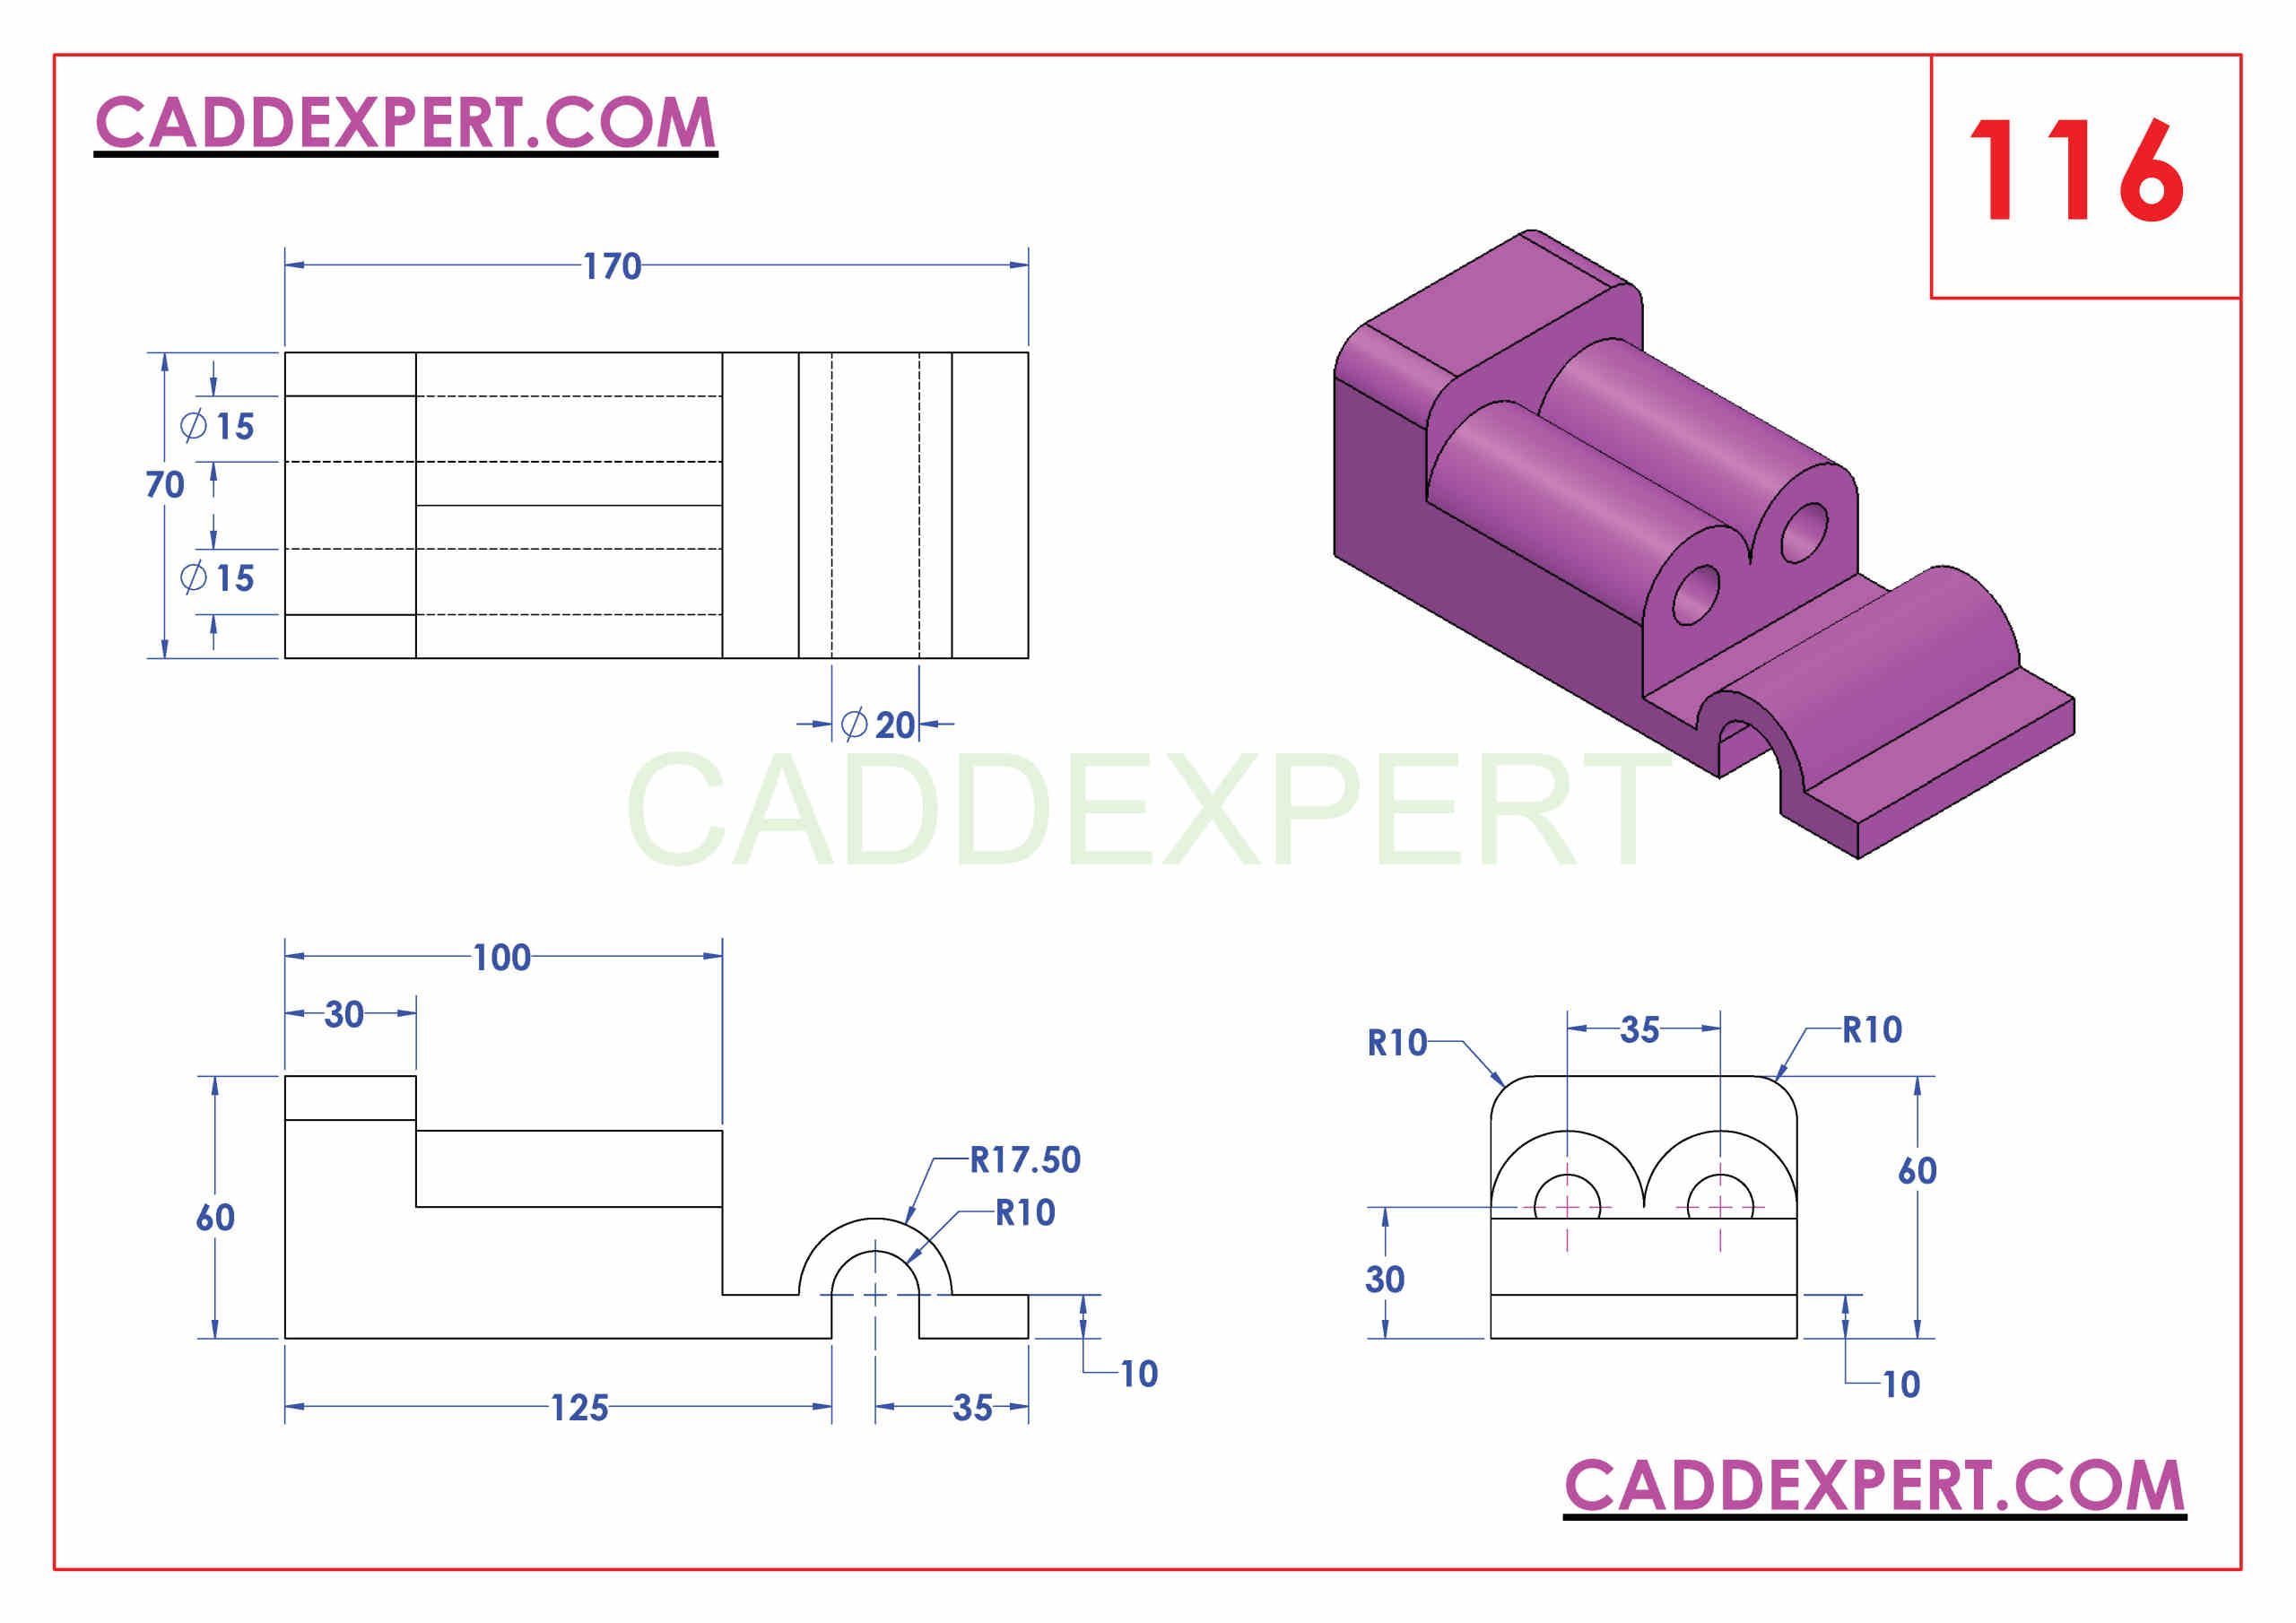 50 SOLIDWORKS EXERCISES PDF - Page 3 of 6 - CADDEXPERT